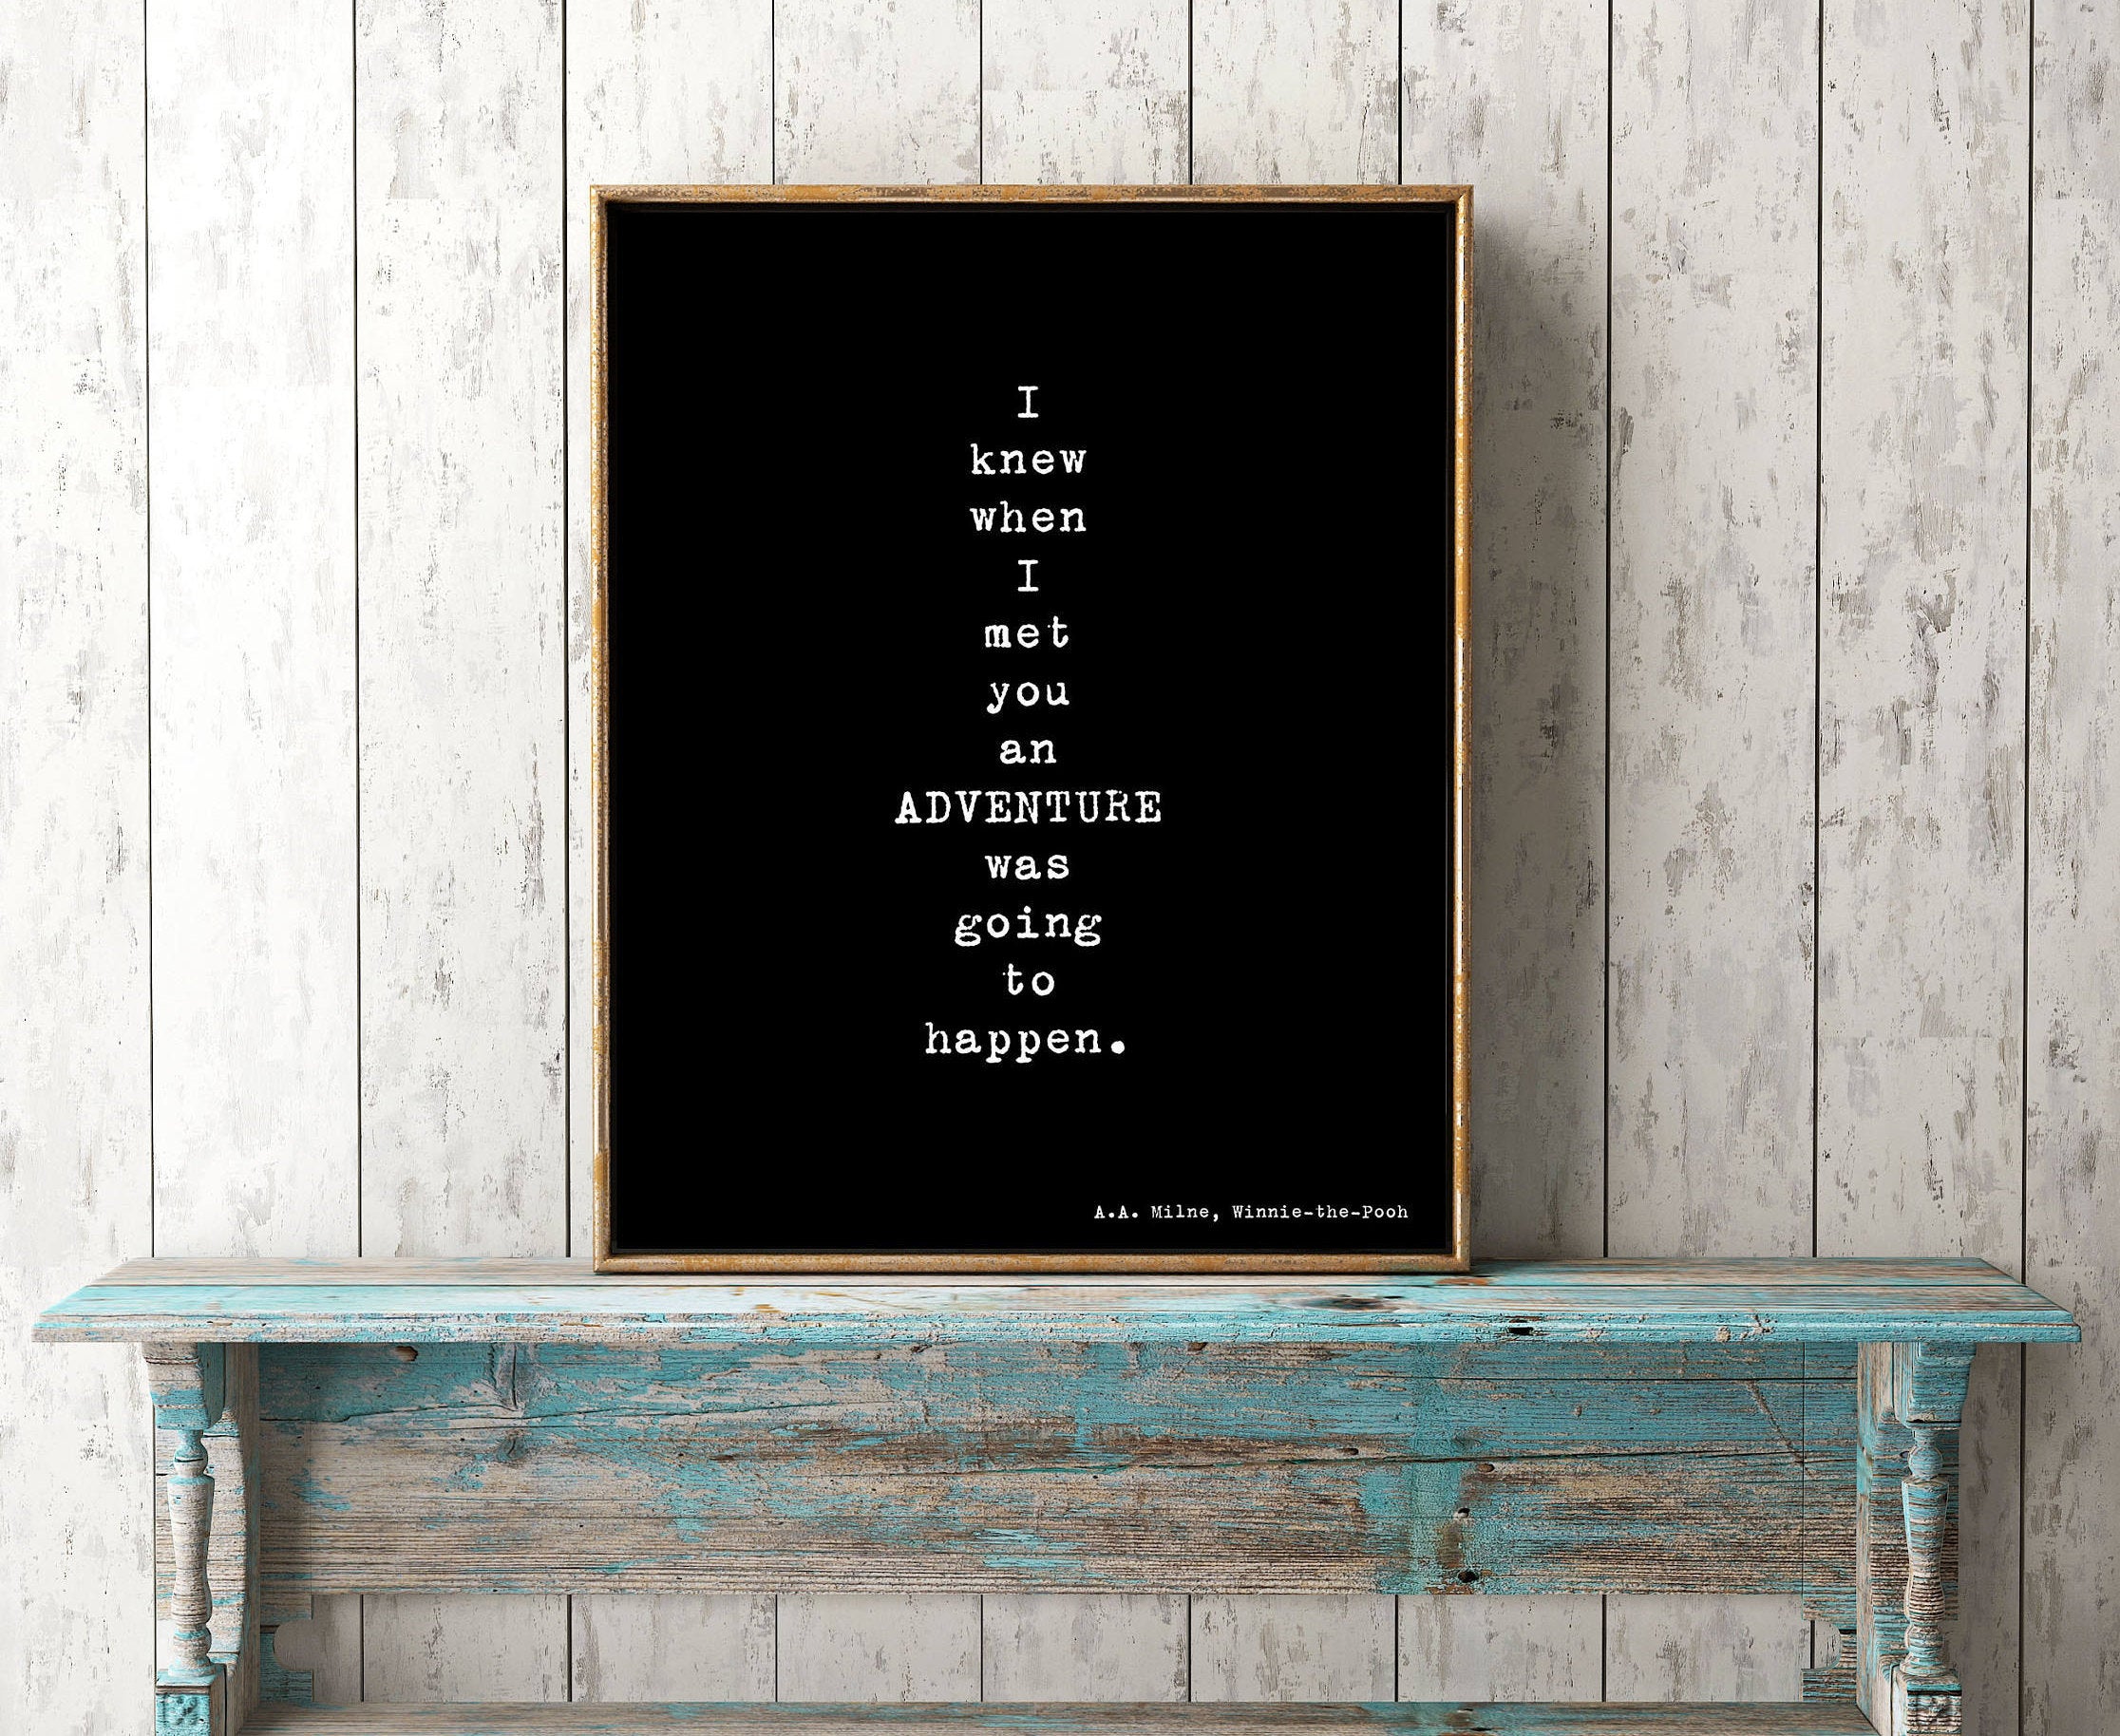 Winnie the Pooh Art Print, I Knew When I Met You Adventure Quote Wall Art in black & White Unframed - BookQuoteDecor